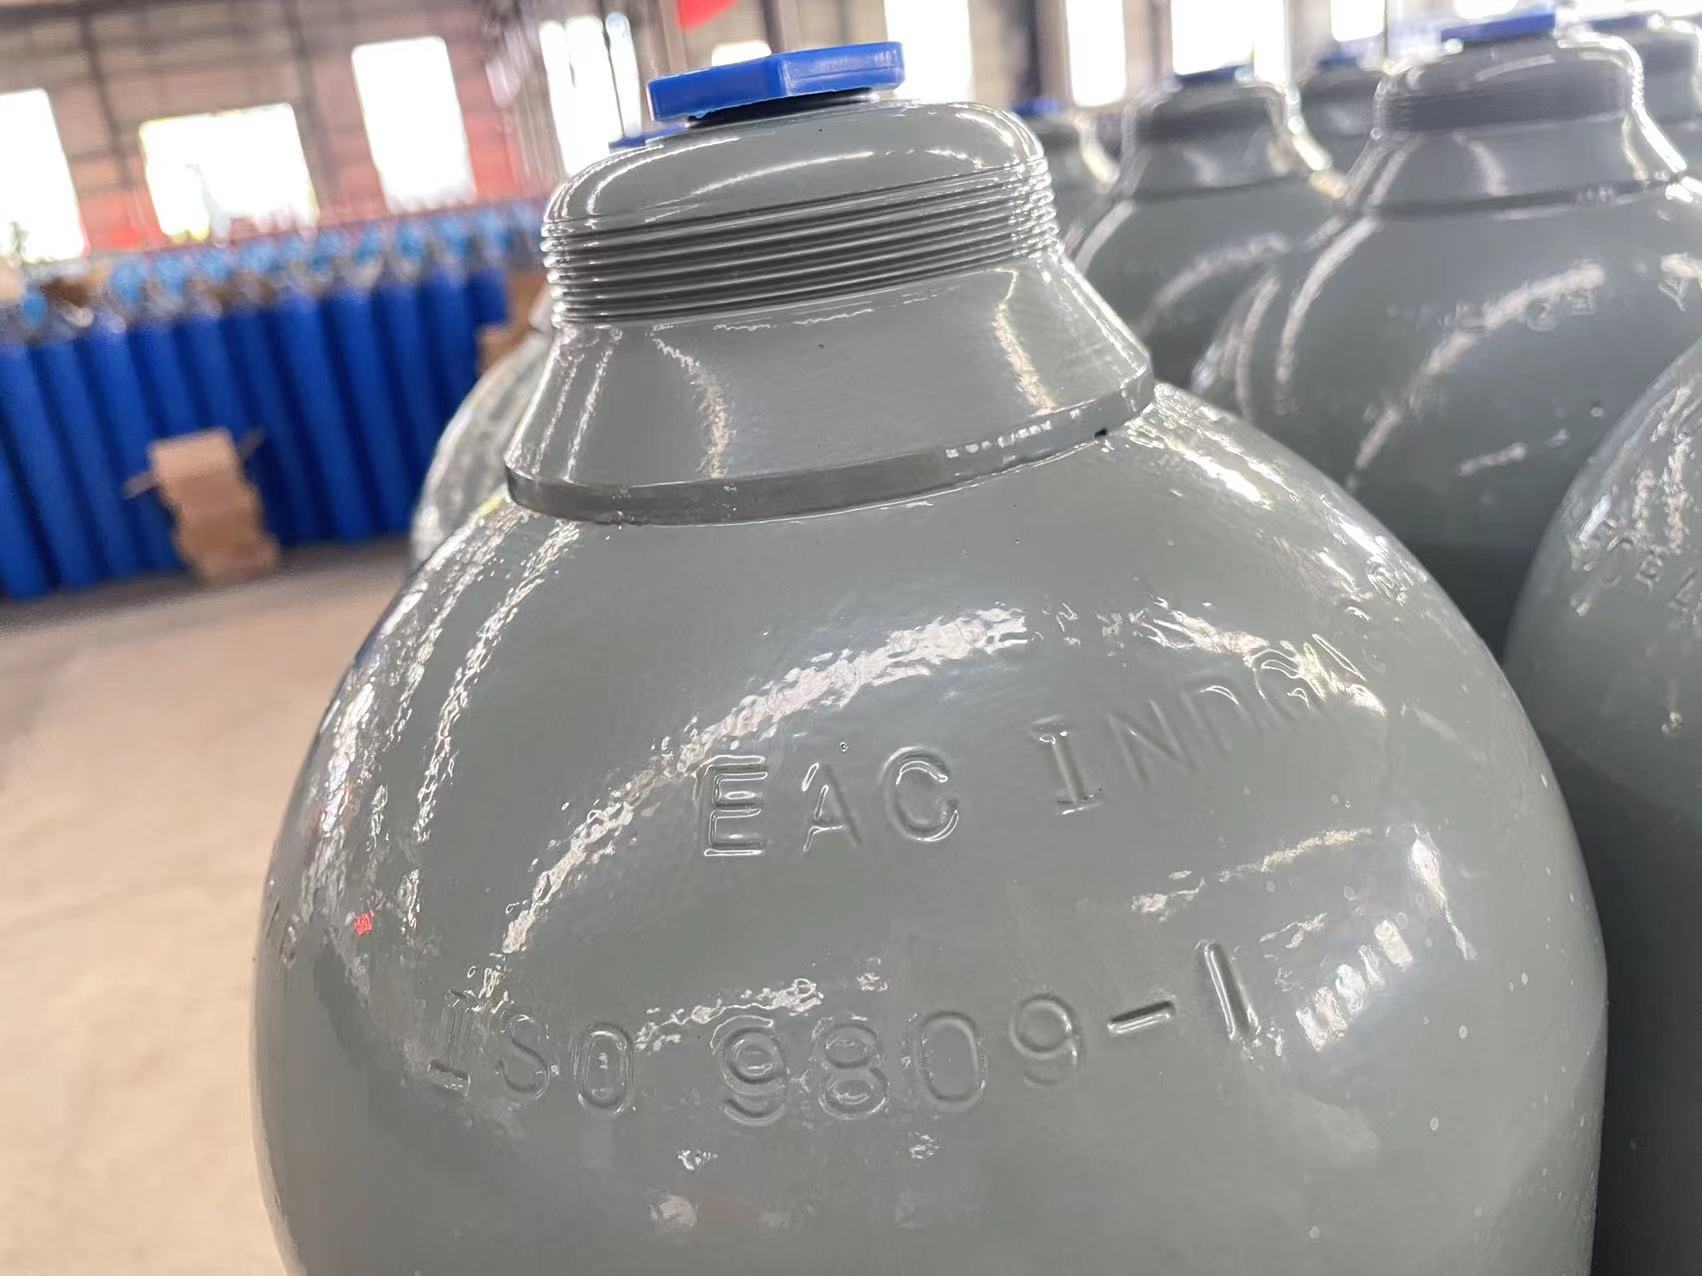 50L Working pressure 300bar ISO9809-1 standard EAC High pressure vessel with TPED Certificate Gas cylinder